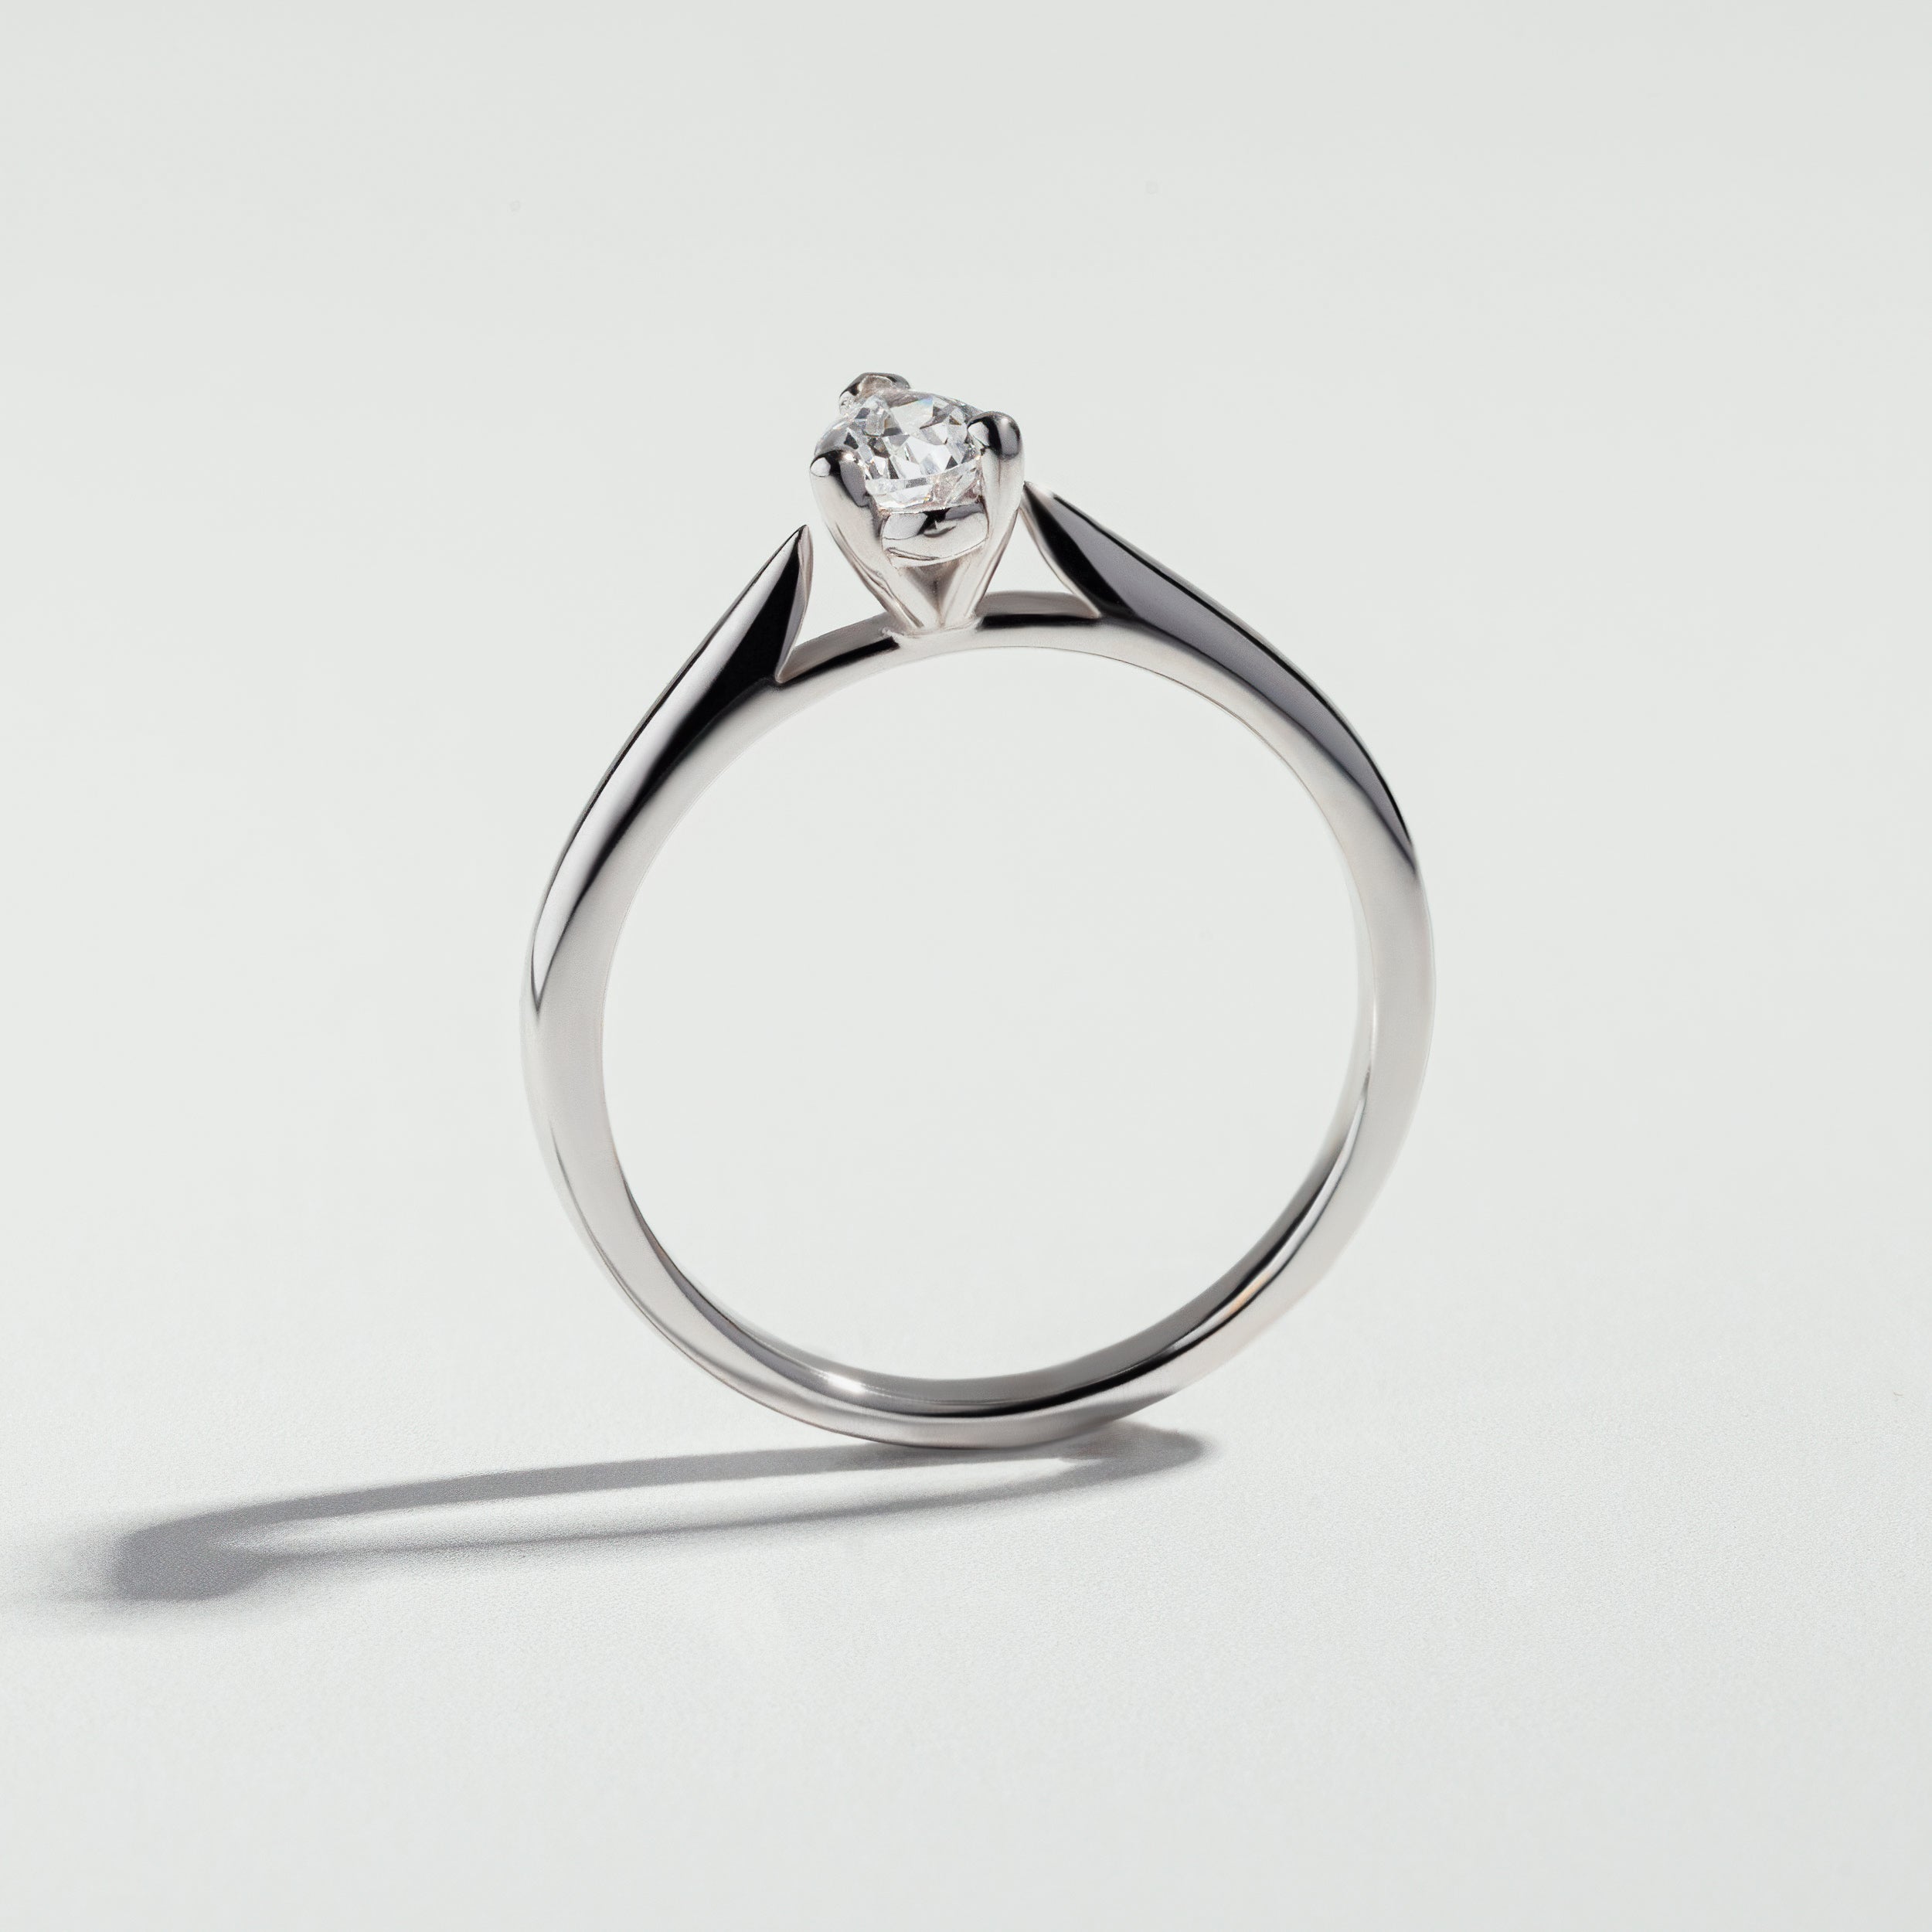 The Pear Shape Knife Edge Diamond Solitaire Ring